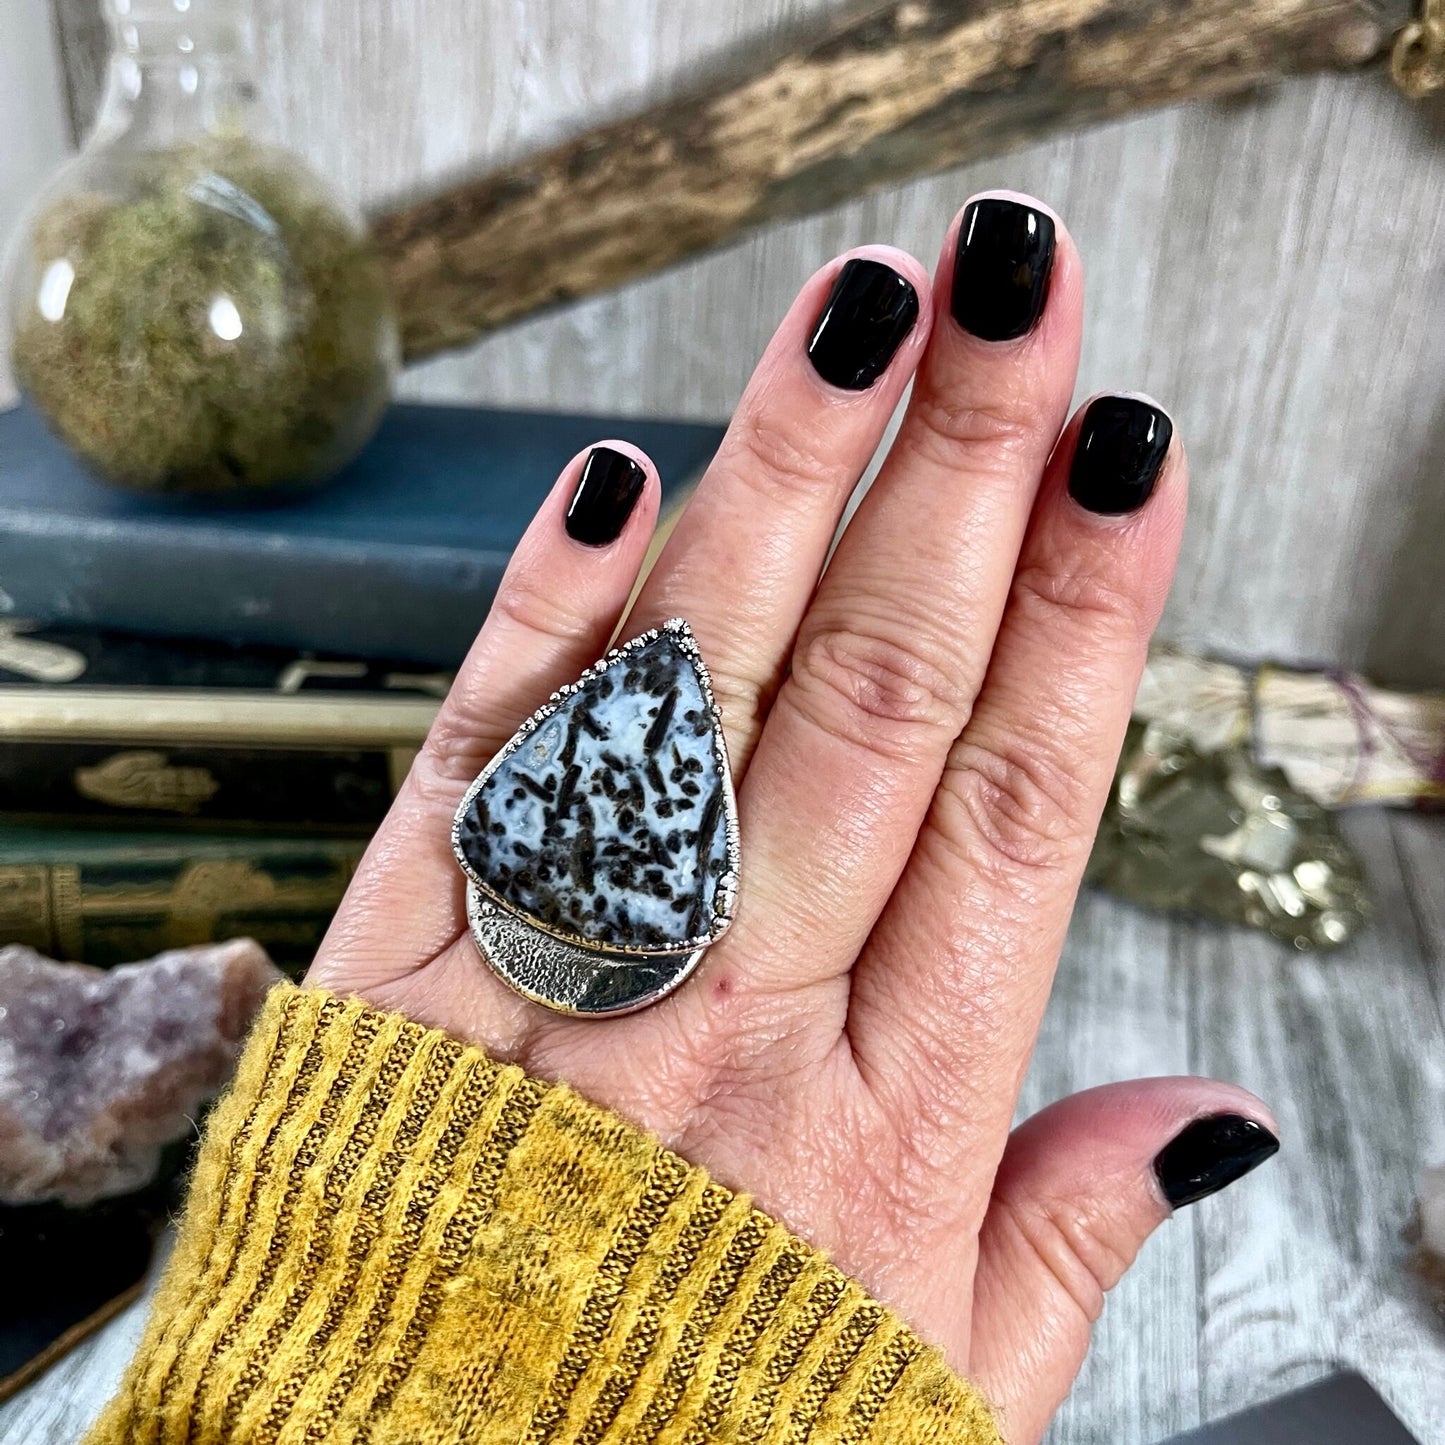 Big Bold Jewelry, Big Crystal Ring, Big Silver Ring, Big Stone Ring, Etsy ID: 1349935725, Fossilized Palm Root, FOXLARK- RINGS, Jewelry, Large Boho Ring, Large Crystal Ring, Large Stone Ring, Natural stone ring, Rings, silver crystal ring, Silver Stone Je